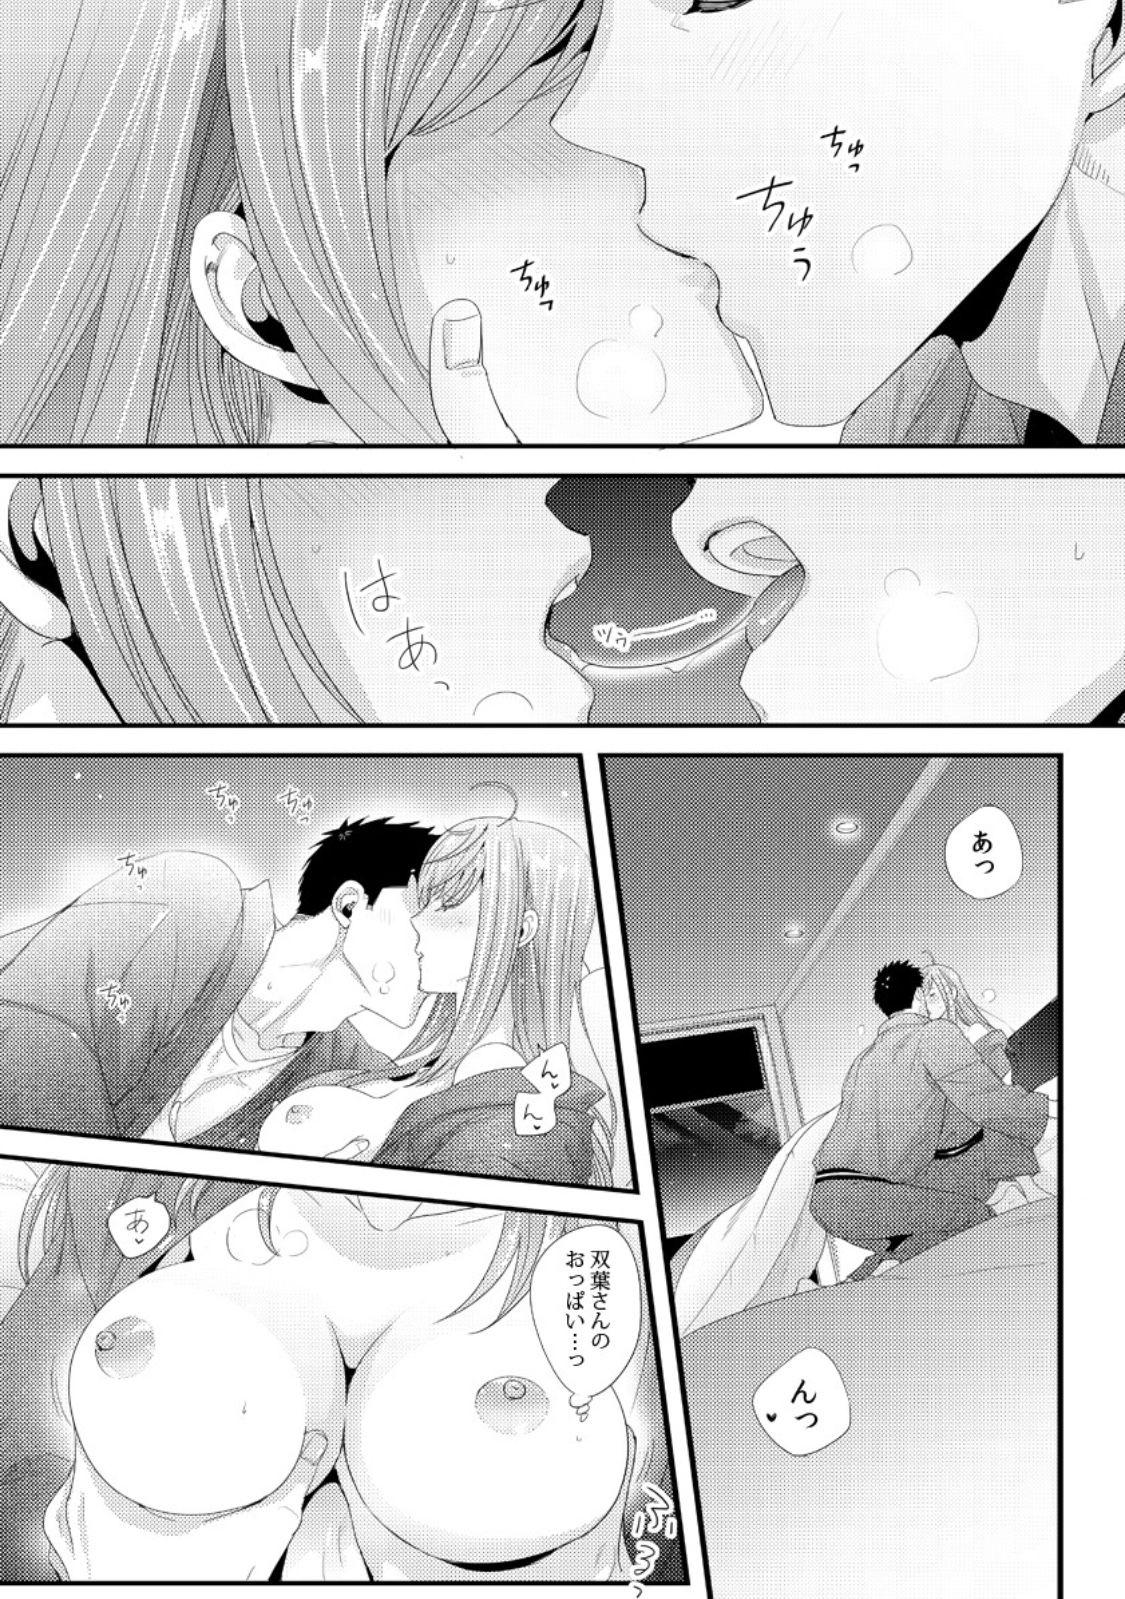 Please Let Me Hold You Futaba-San! Ch. 1-4 18